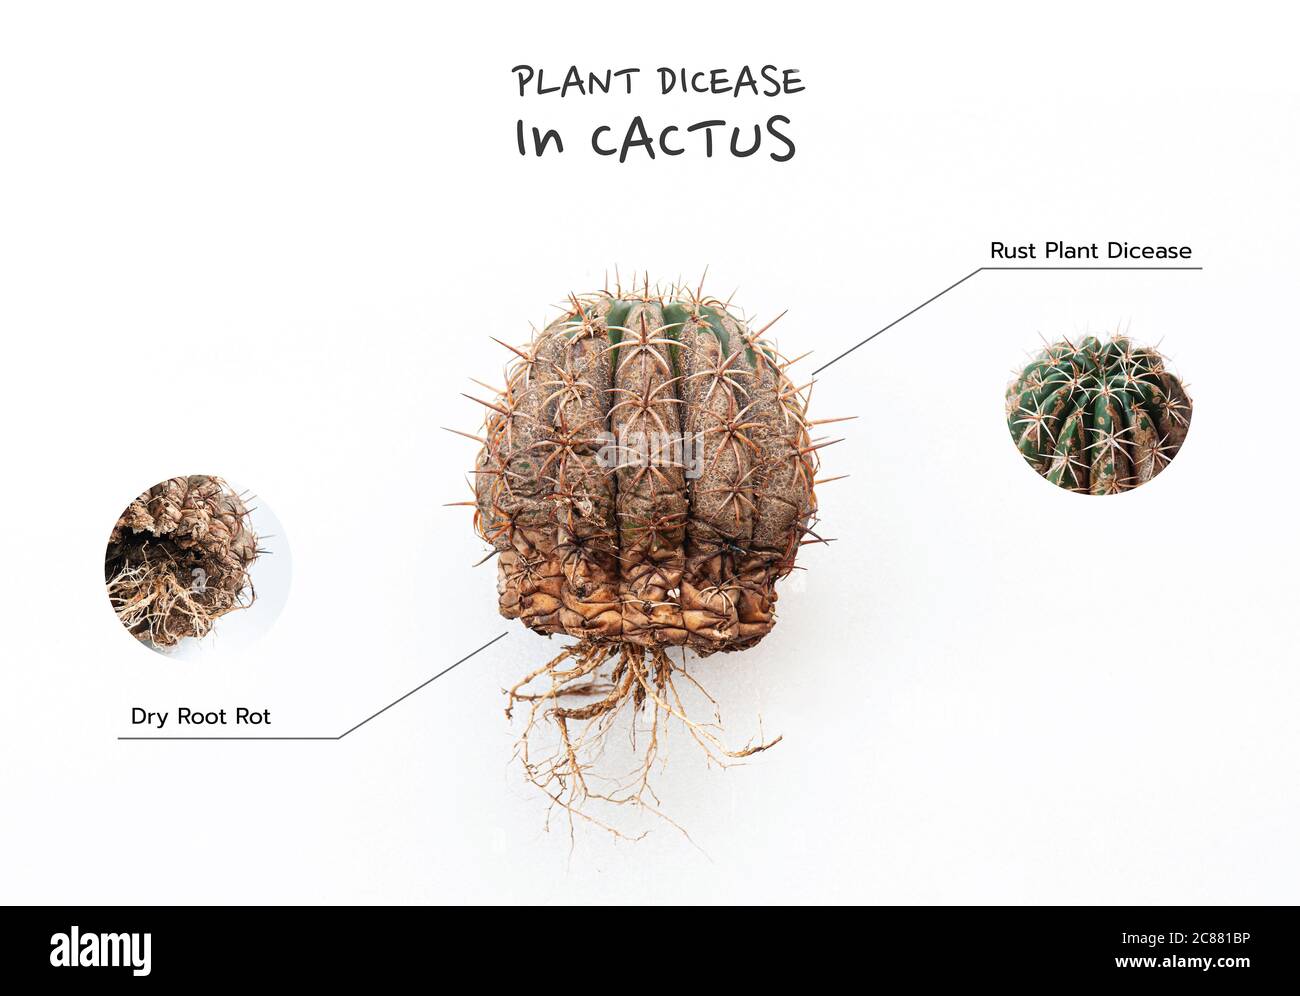 Cactus disease dry root rot rust plant caused by fungi, fungi infected Melocactus isolated on white background showing serious damage on skin Stock Photo